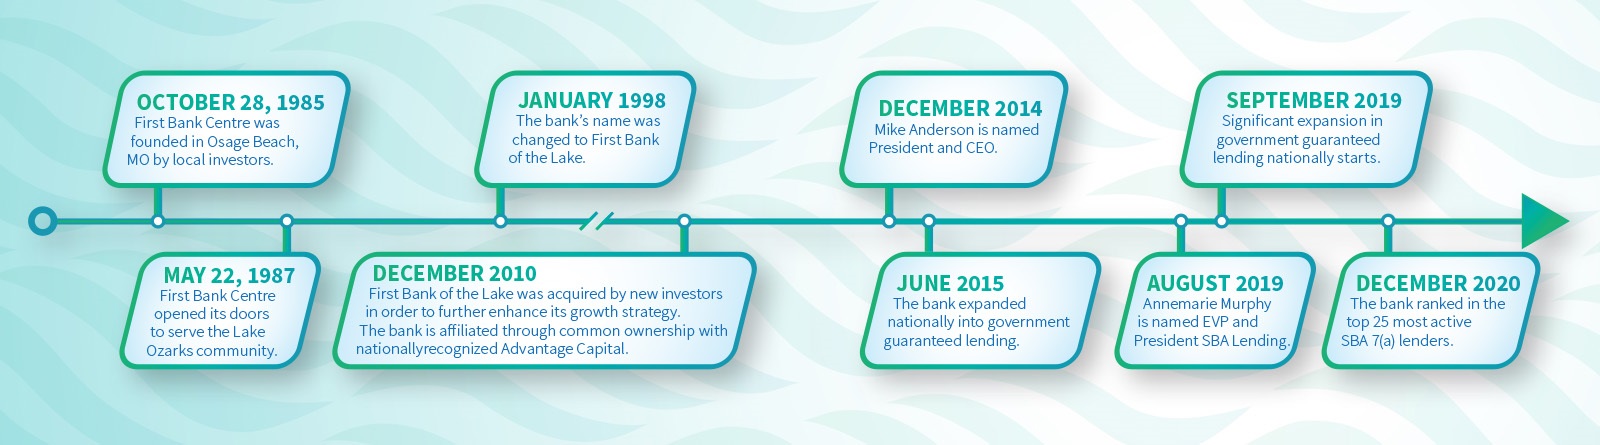 History timeline for First Bank of the Lake